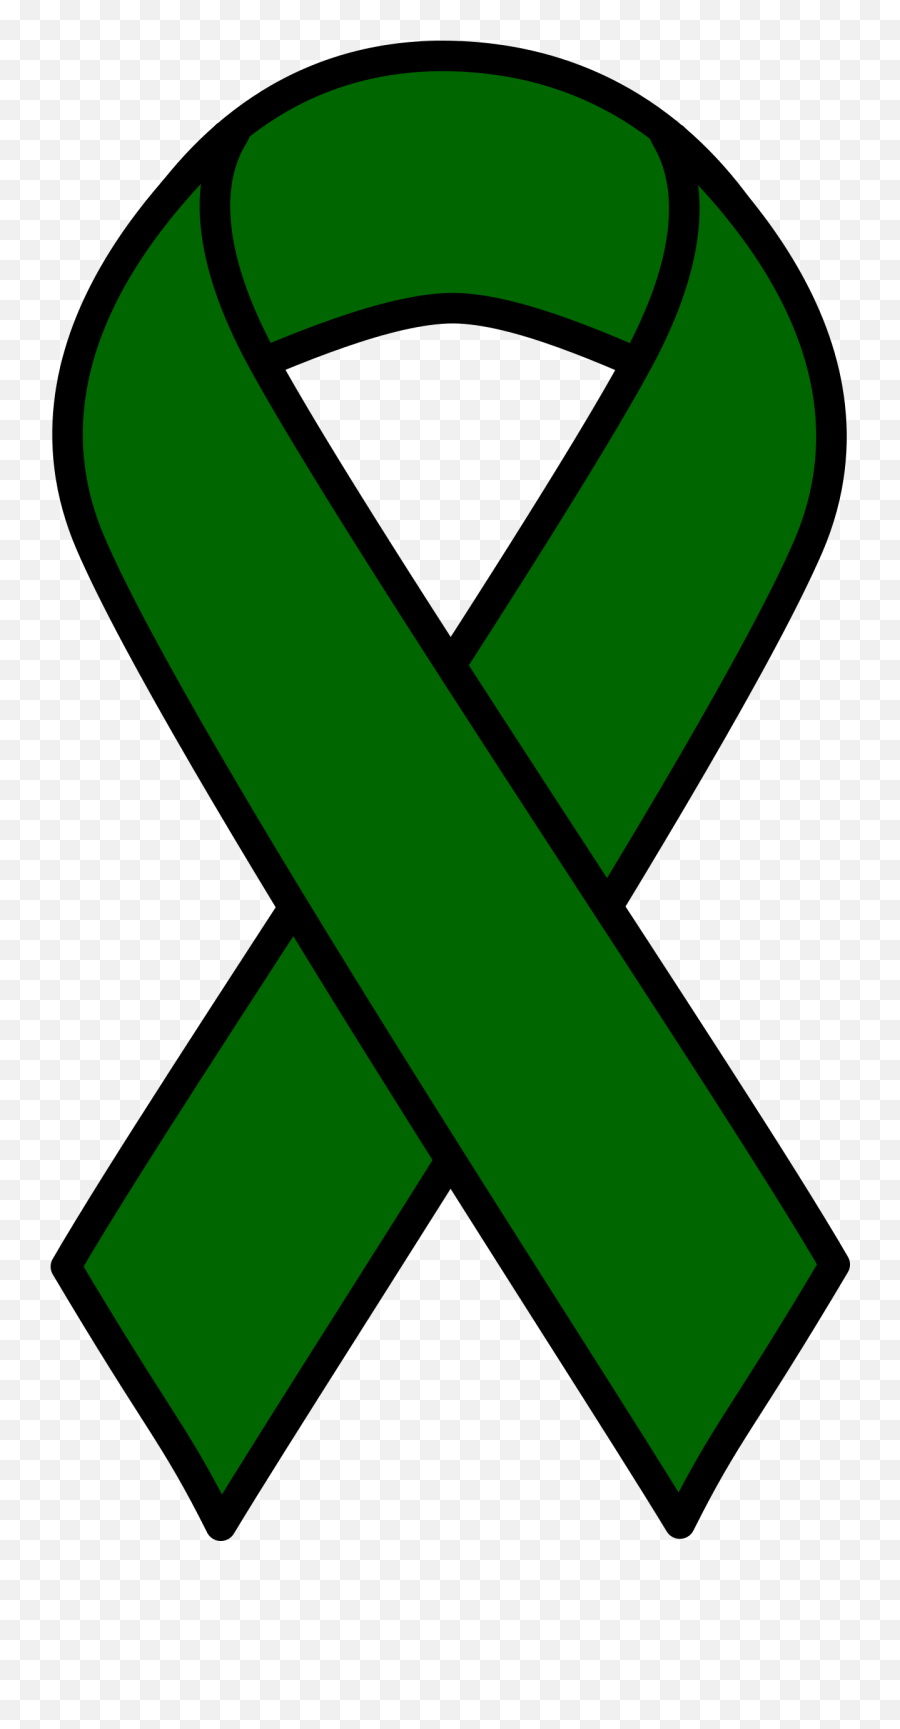 Free Cancer Ribbon Cliparts Download - Green Liver Cancer Ribbon Emoji,Cancer Symbol Emoji